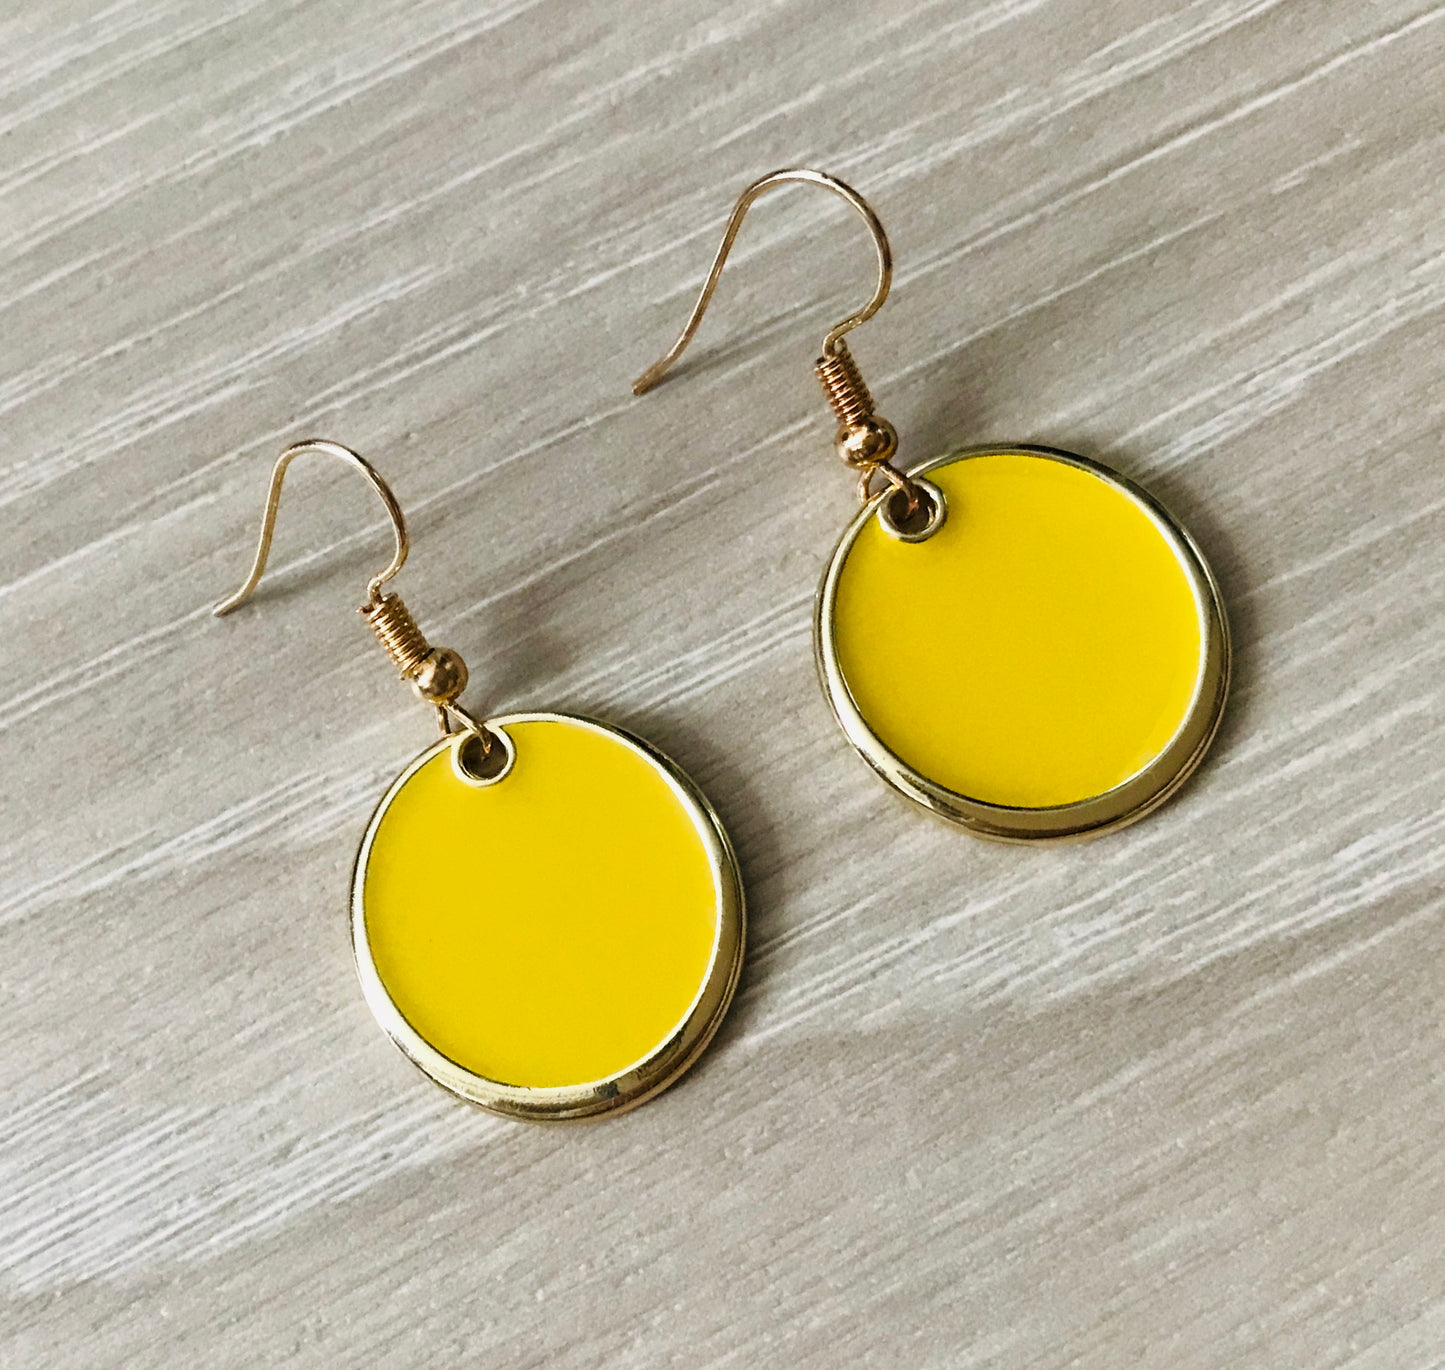 Colorful Round Circle Disc Enamel Earrings minimalist gifts